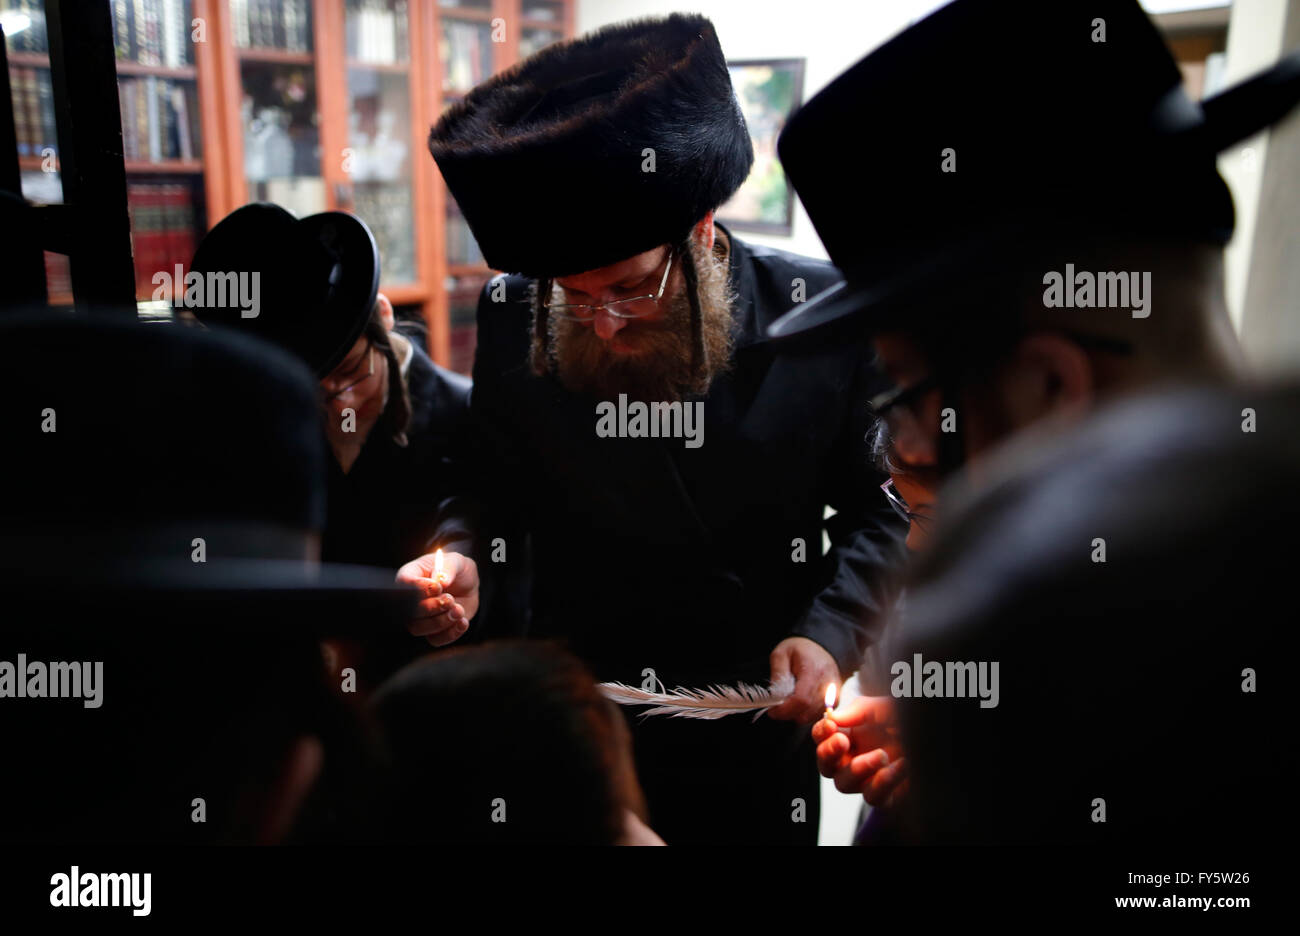 (160422) -- TEL AVIV, April 22, 2016 (Xinhua) -- An Ultra-orthodox Jewish family pray as they use a candle to search for the remains of bread in preparation for the upcoming Jewish holiday of Passover in Rehovot, south of Tel Aviv, Israel on April 21, 2016. Passover, which will be marked on April 22, 2016, commemorates the story of the Exodus as described in the Hebrew Bible especially in the Book of Exodus, in which the Israelites were freed from slavery in Egypt. (Xinhua/Gil Cohen Magen) Stock Photo